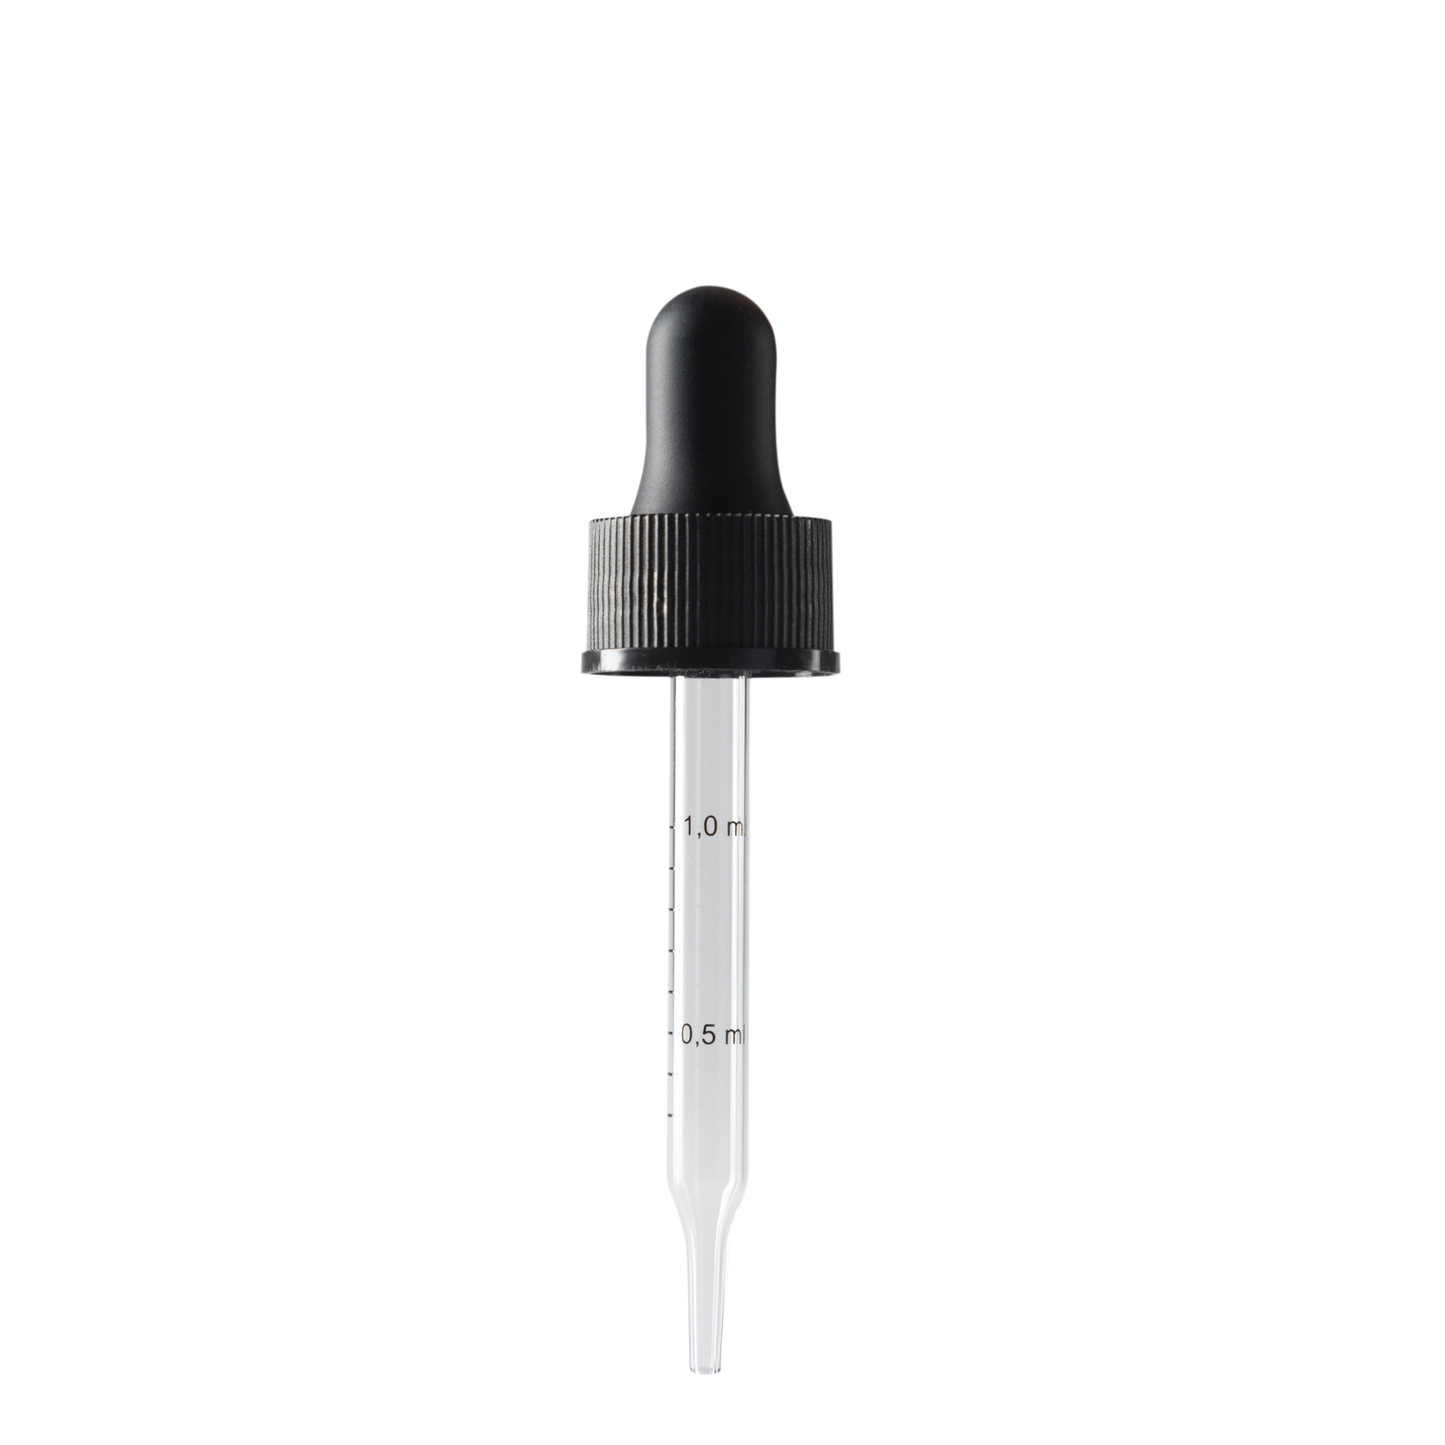 2 oz black glass dropper is perfect for the little bits of liquid needed in recipes or to measure medications.